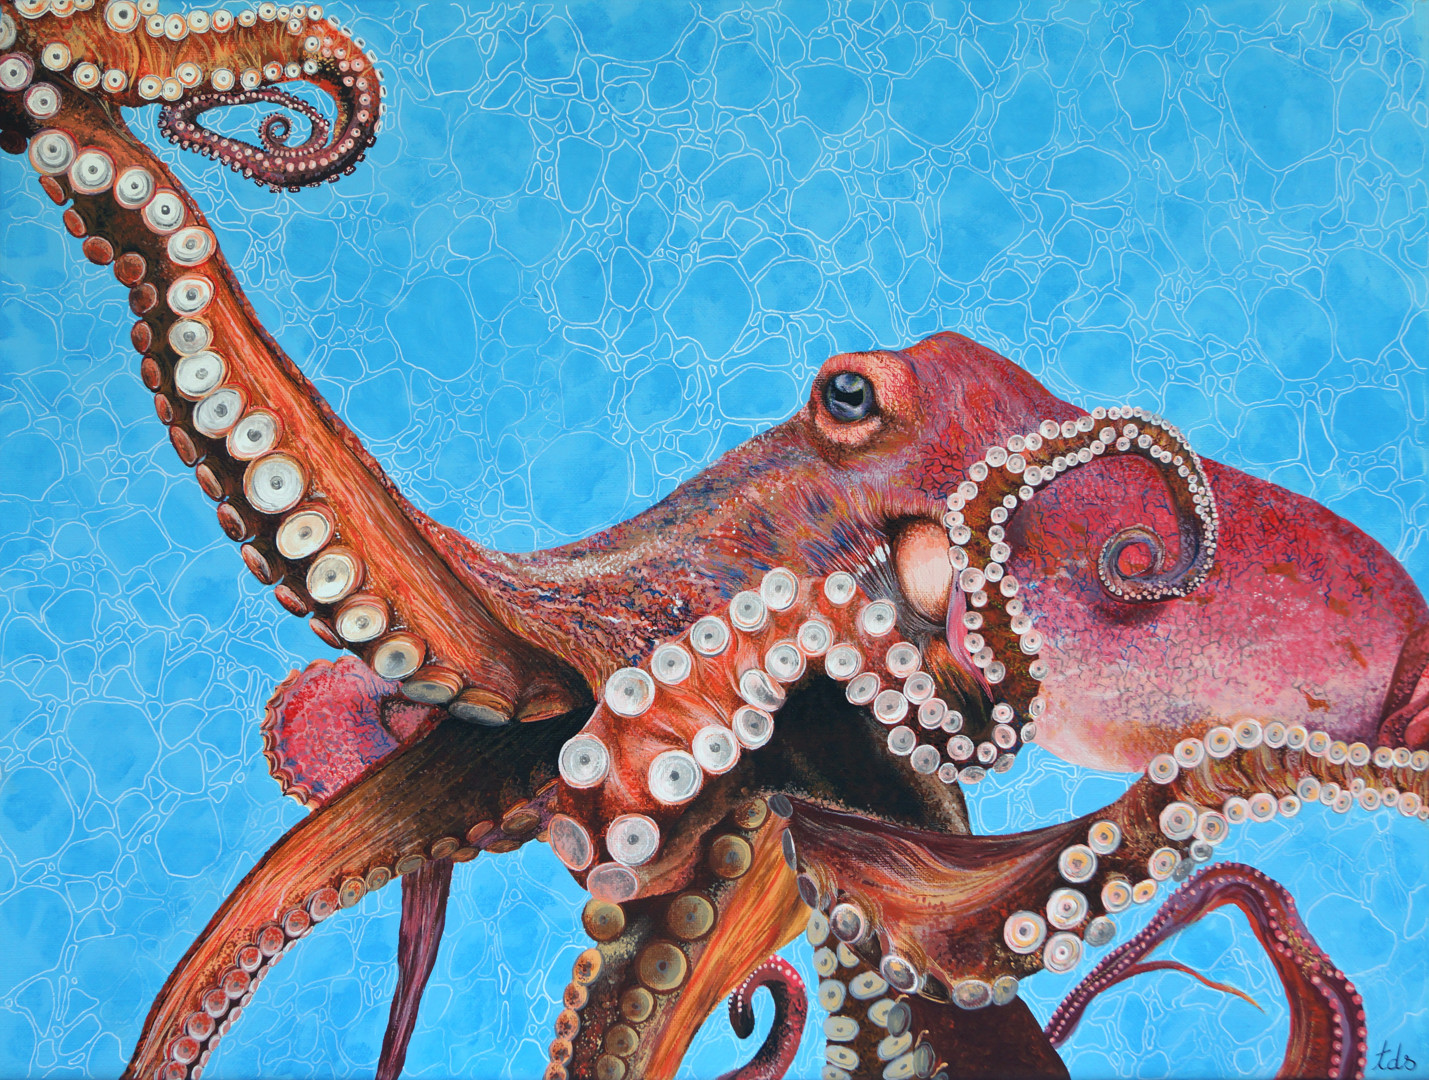 Octopus Painting By Tracy De Sousa Artmajeur